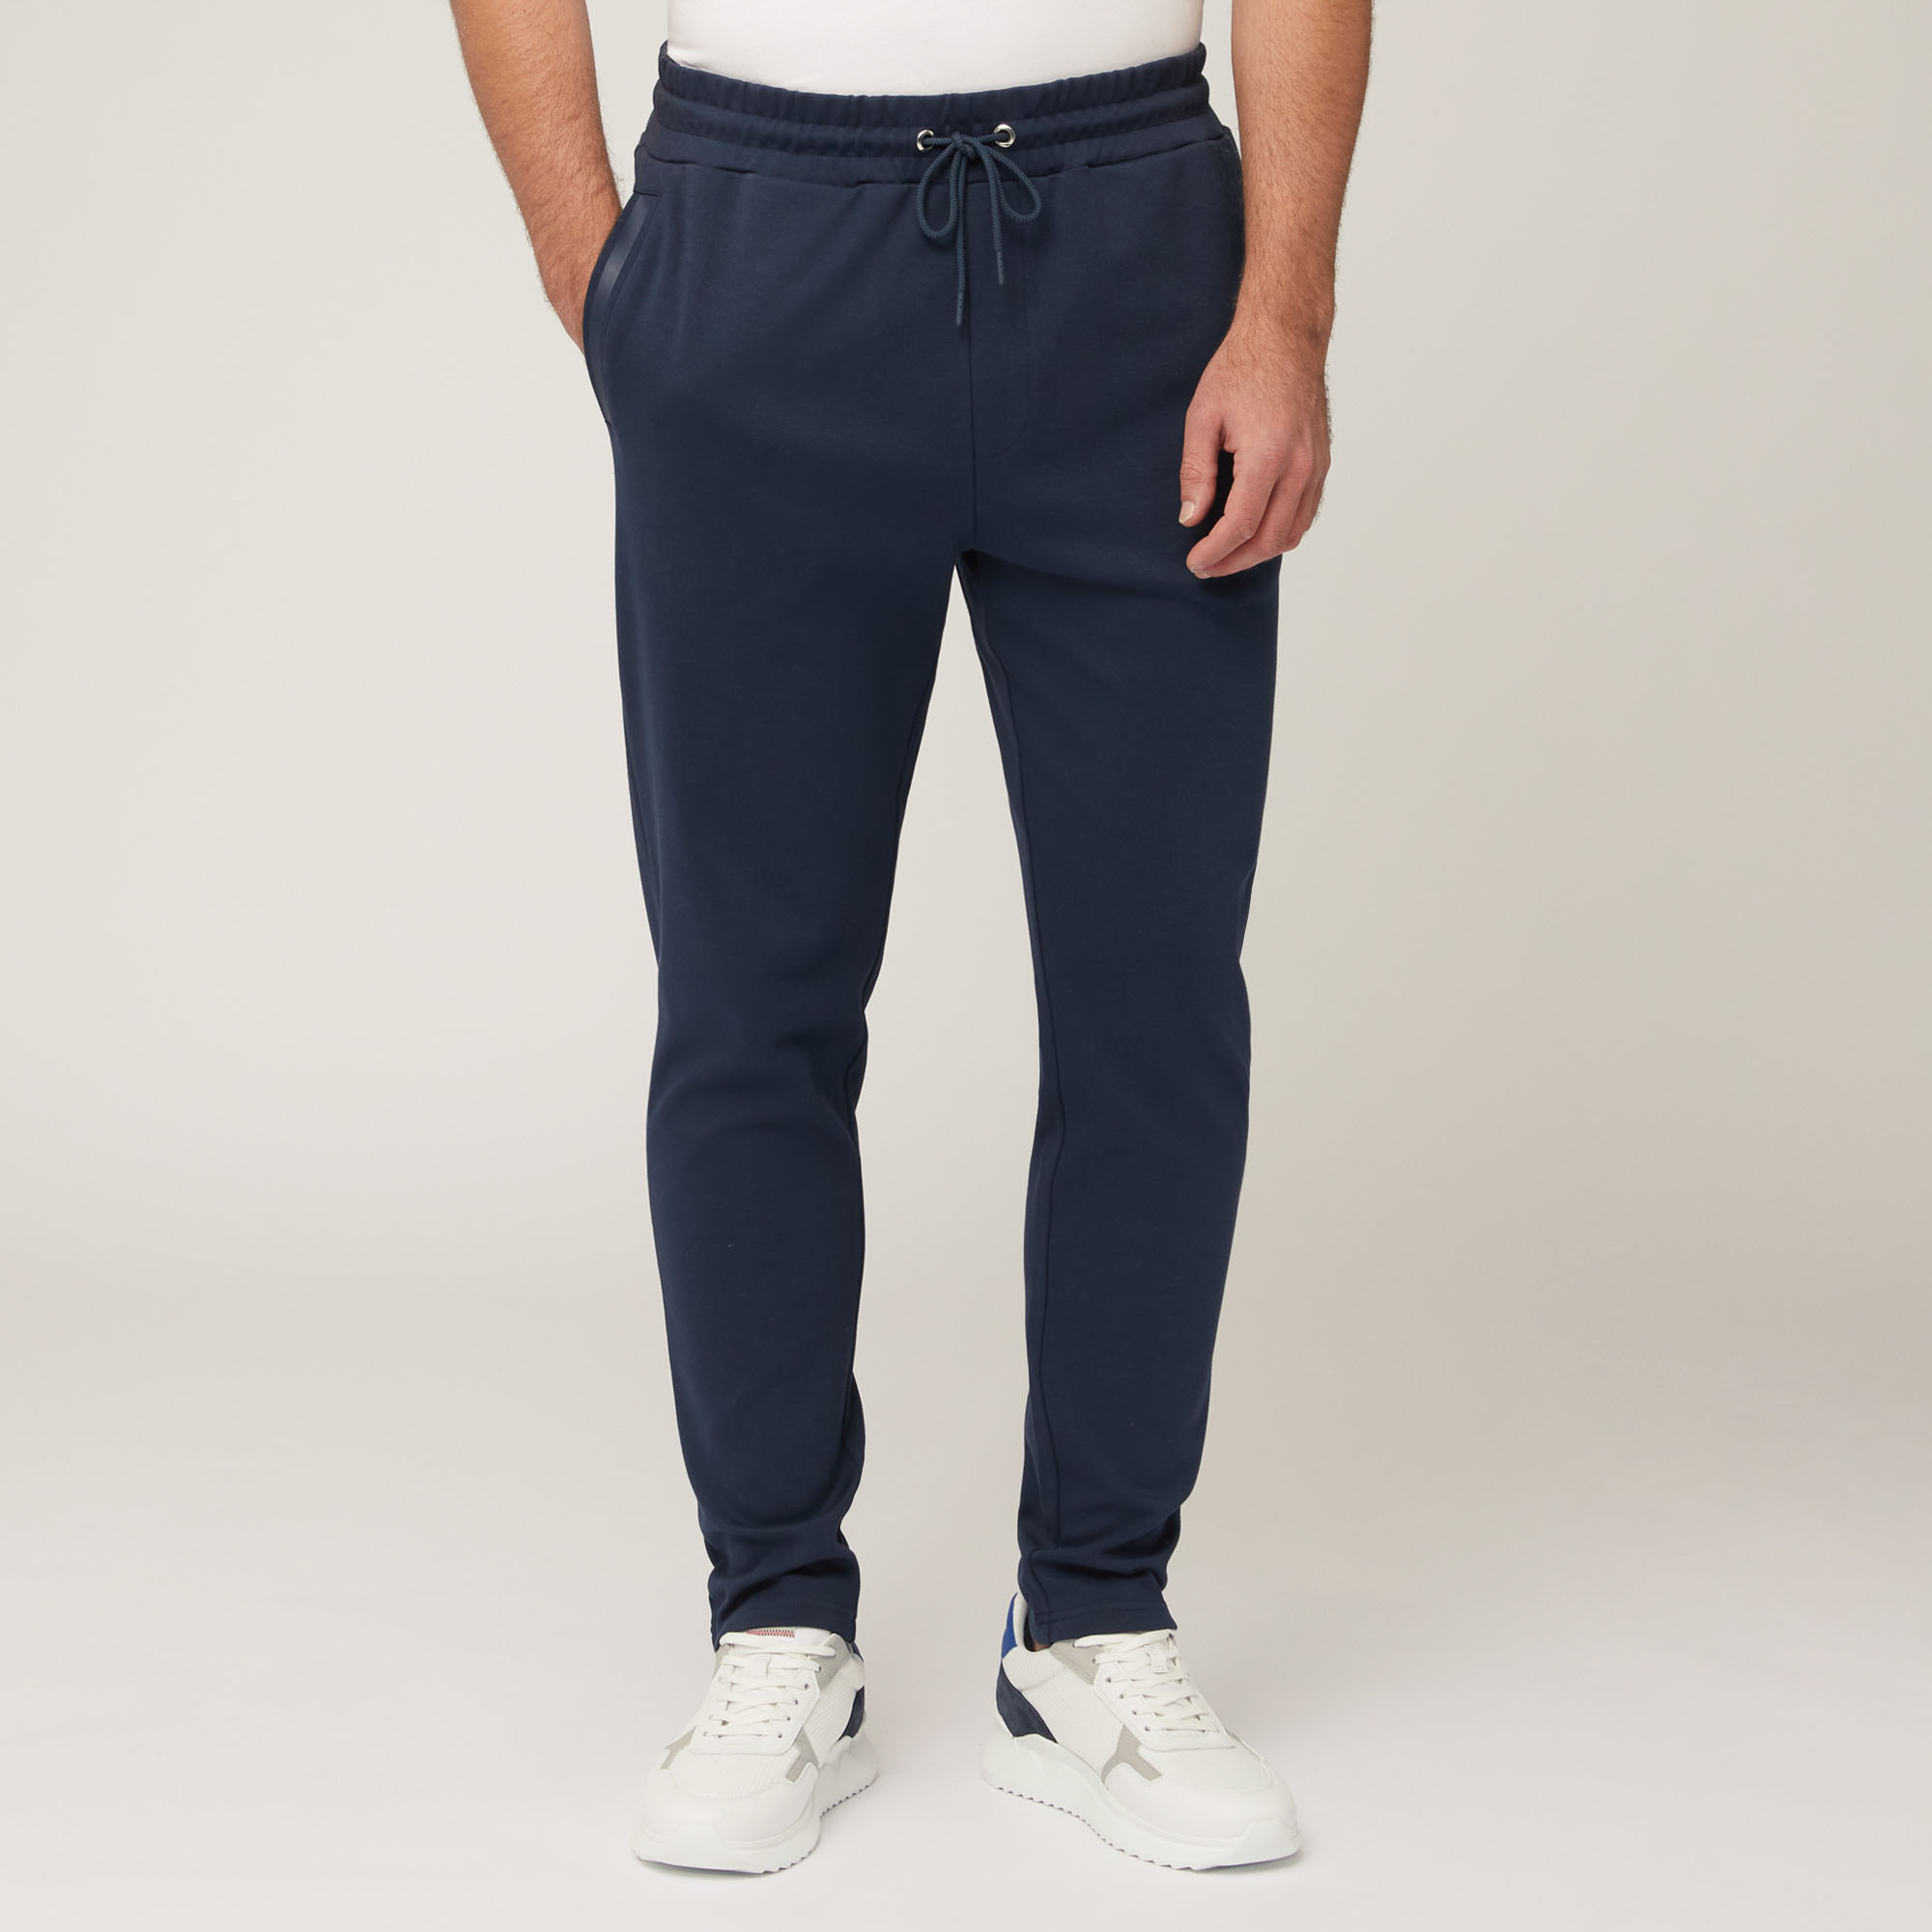 Cotton Pants with Back Pocket